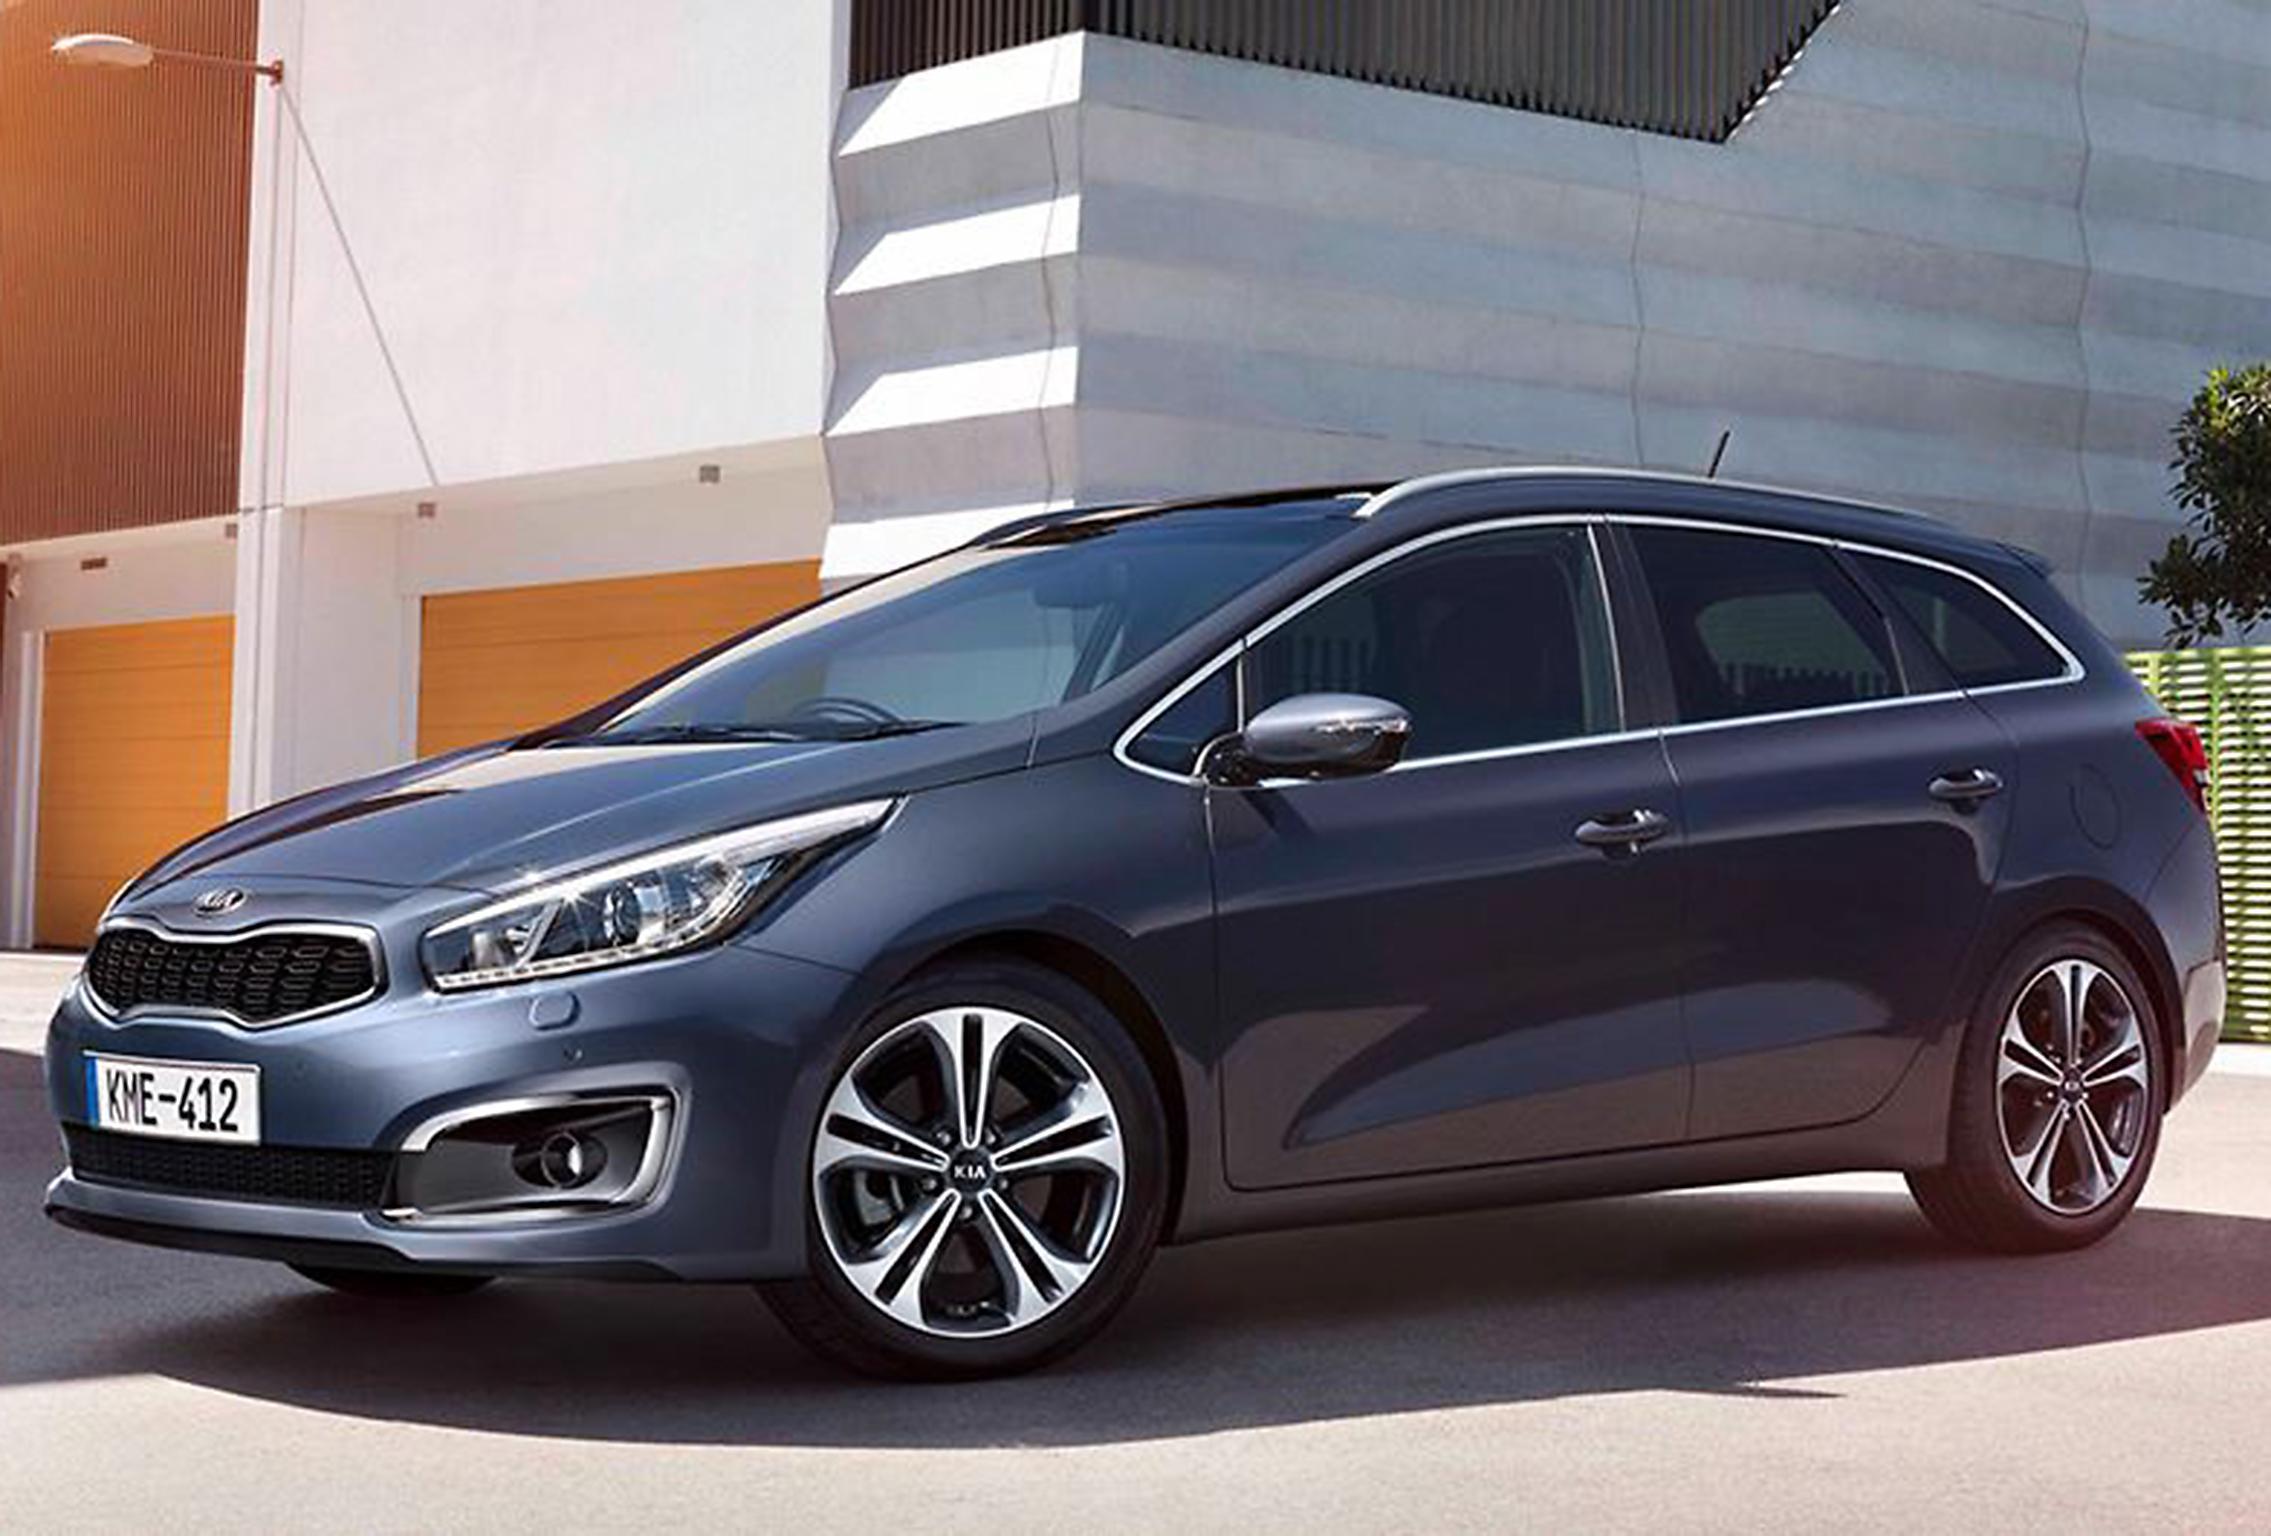 If you covered the badge on the steering wheel, few would be able to tell the Kia cee’d Sportswagon apart from its more well-known competition